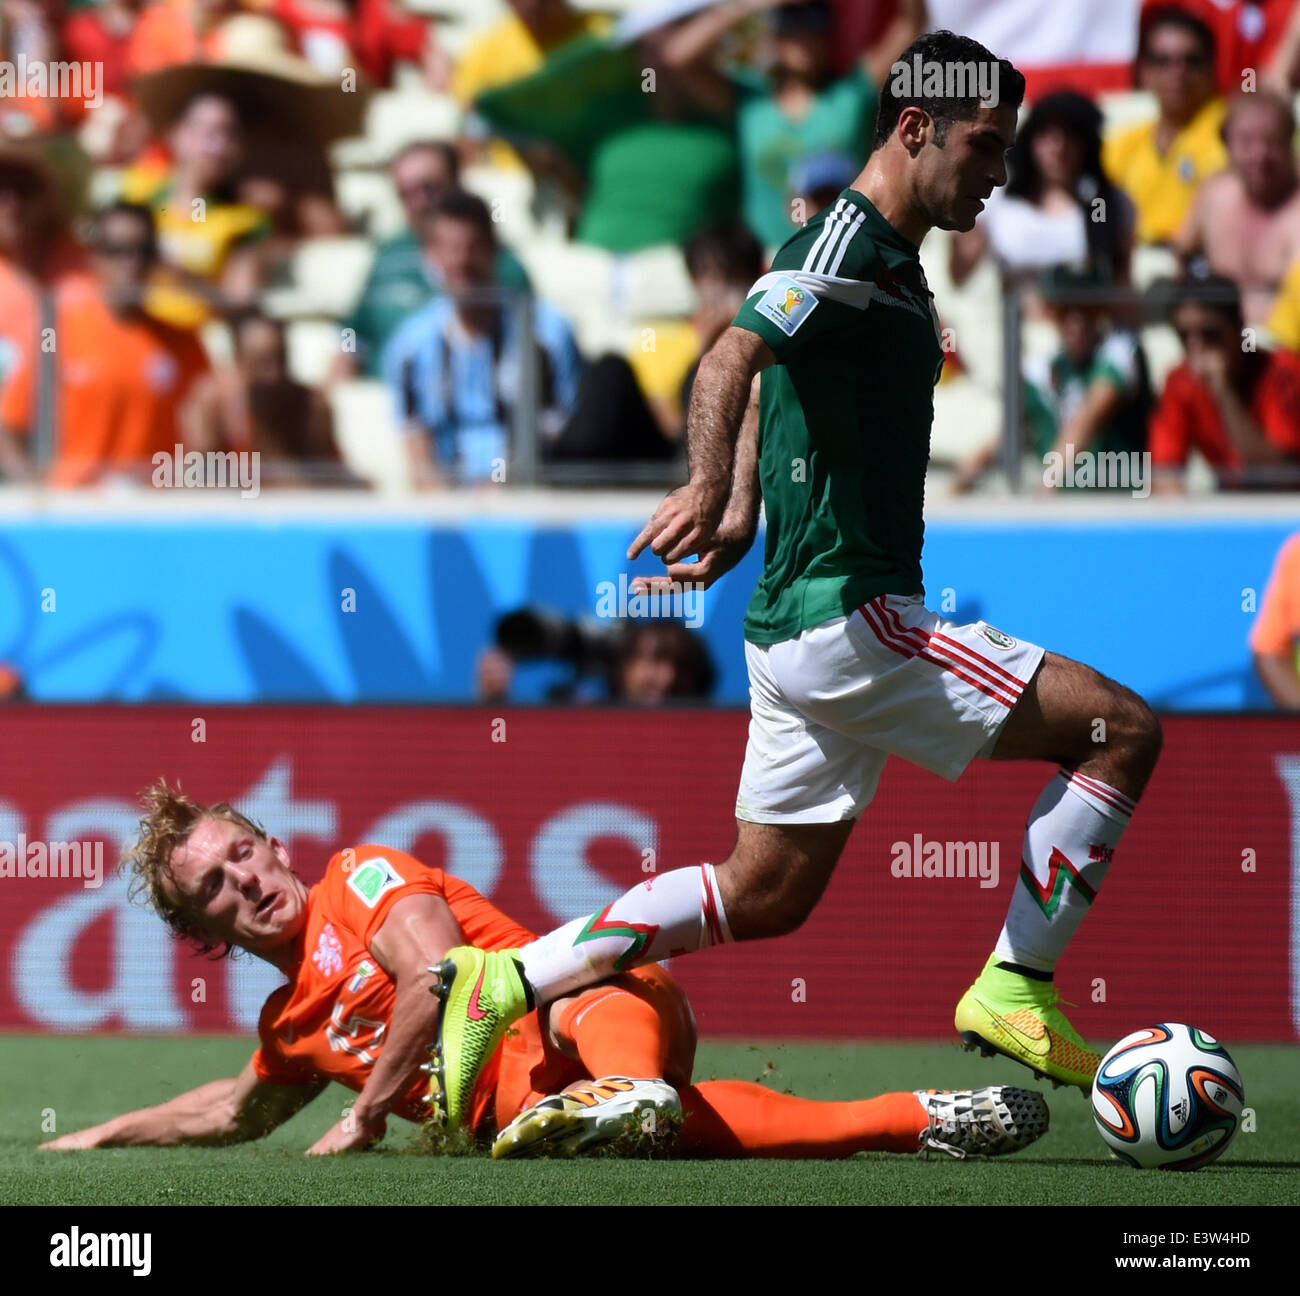 Fortaleza, Brazil. 29th June, 2014. Netherlands's Dirk Kuyt (L) vies with Mexico's Rafael Marquez during a Round of 16 match between Netherlands and Mexico of 2014 FIFA World Cup at the Estadio Castelao Stadium in Fortaleza, Brazil, on June 29, 2014. Credit:  Li Ga/Xinhua/Alamy Live News Stock Photo